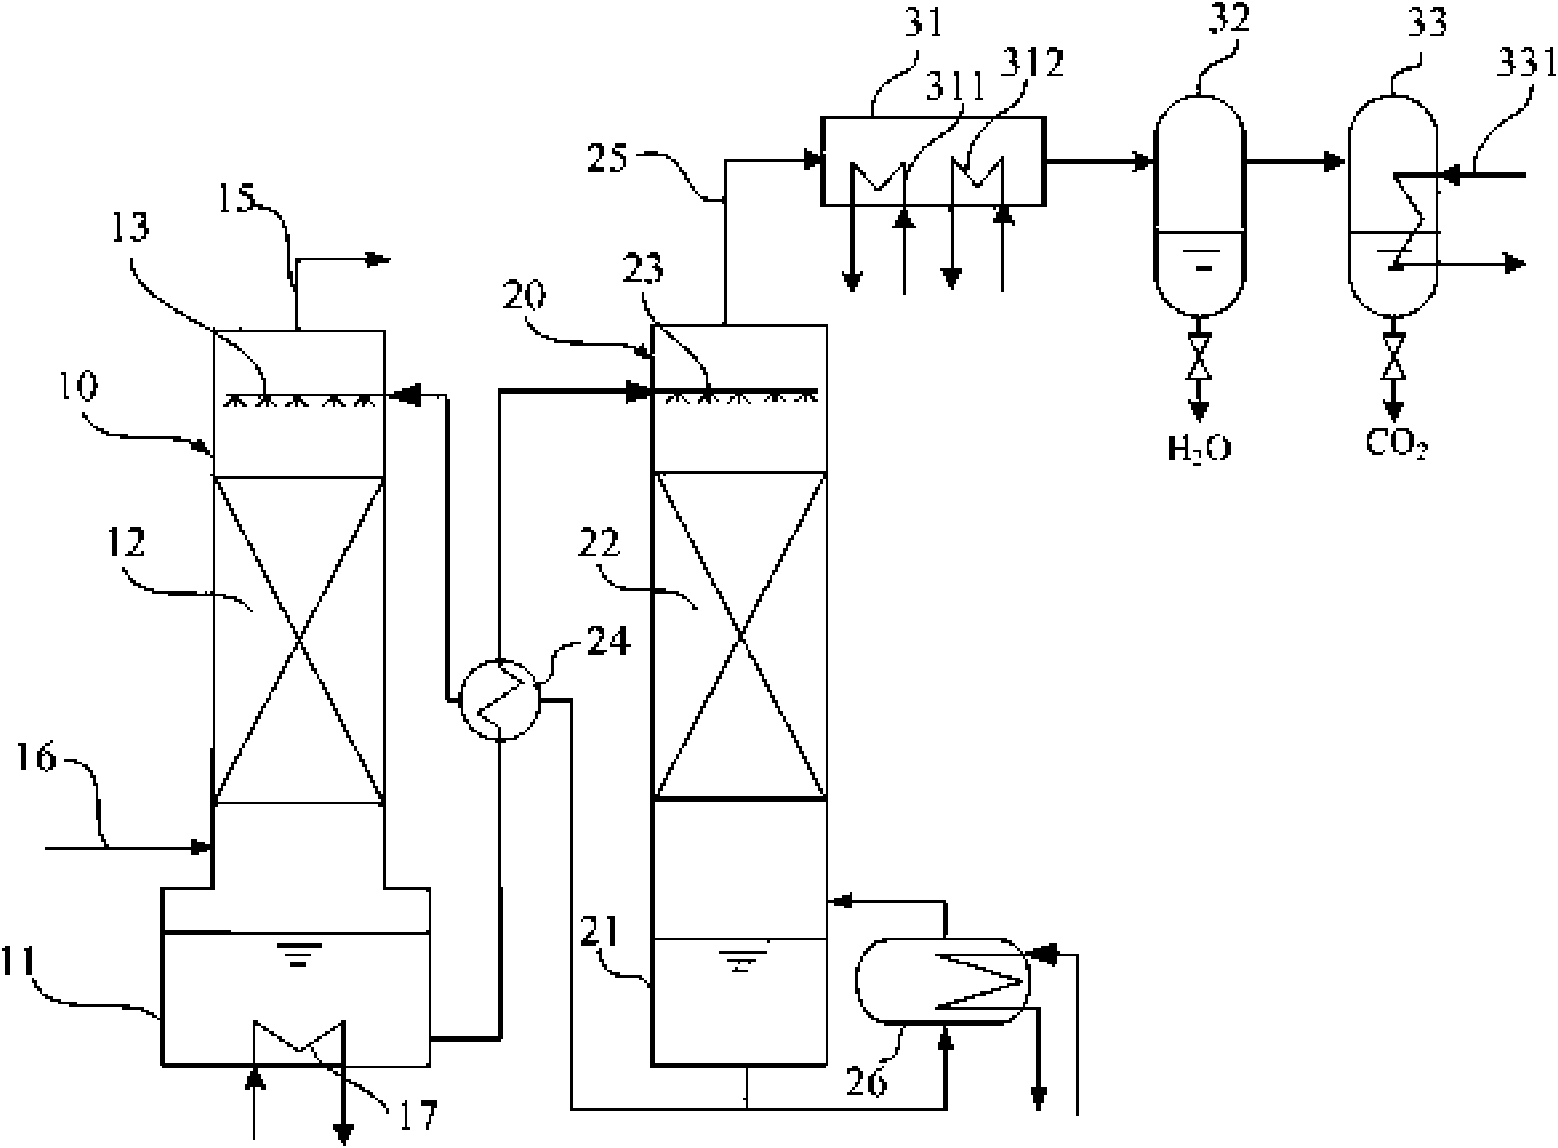 Heat-supply and carbon-dioxide capturing system and method